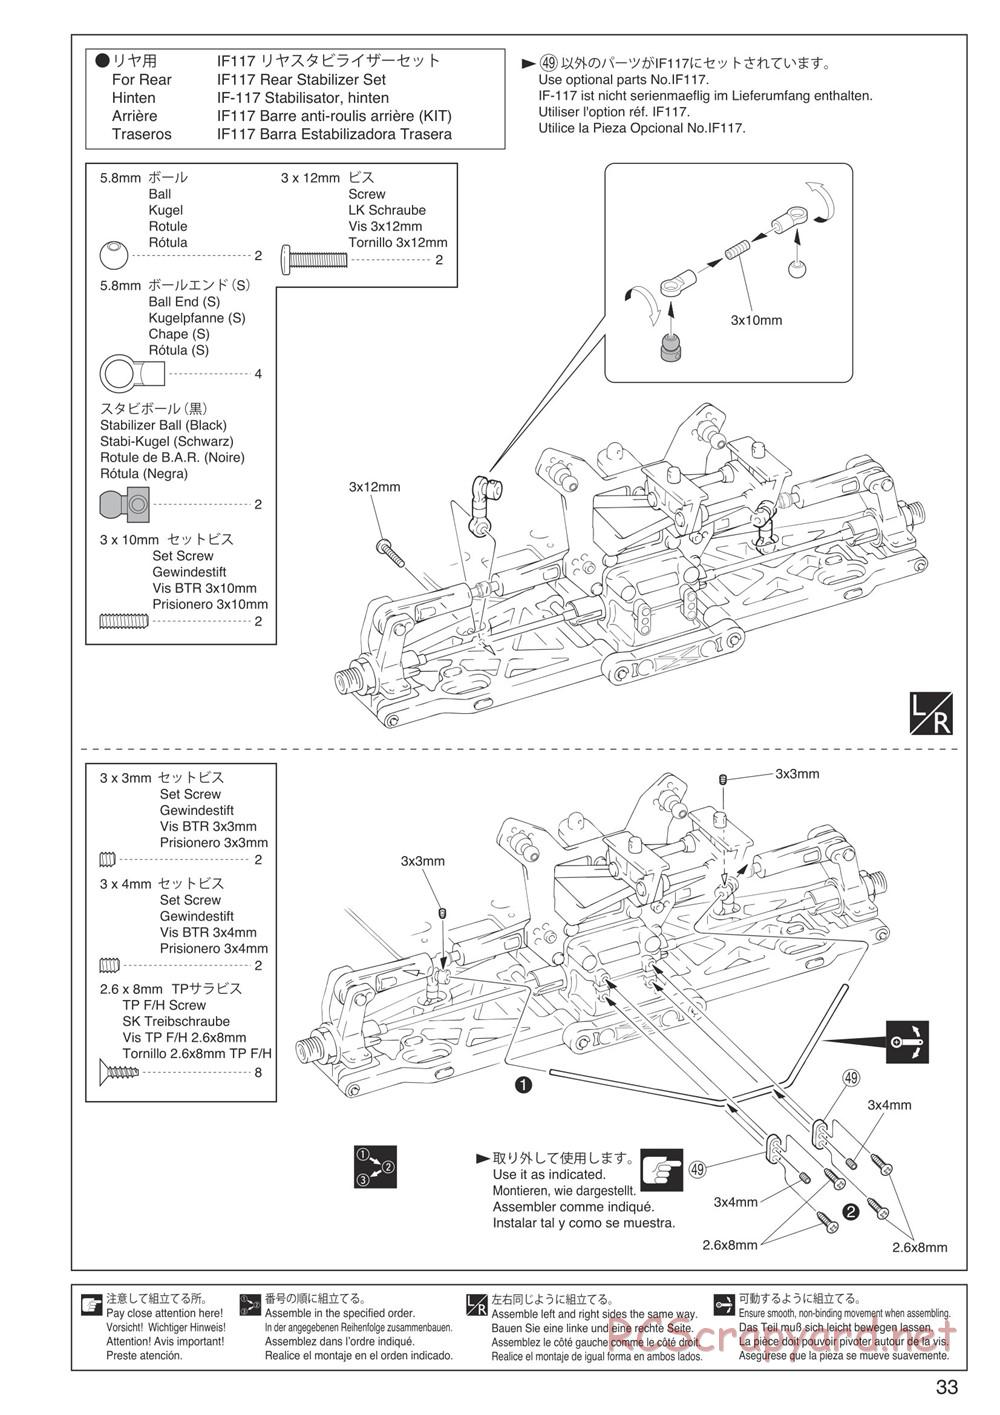 Kyosho - Inferno Neo - Manual - Page 33